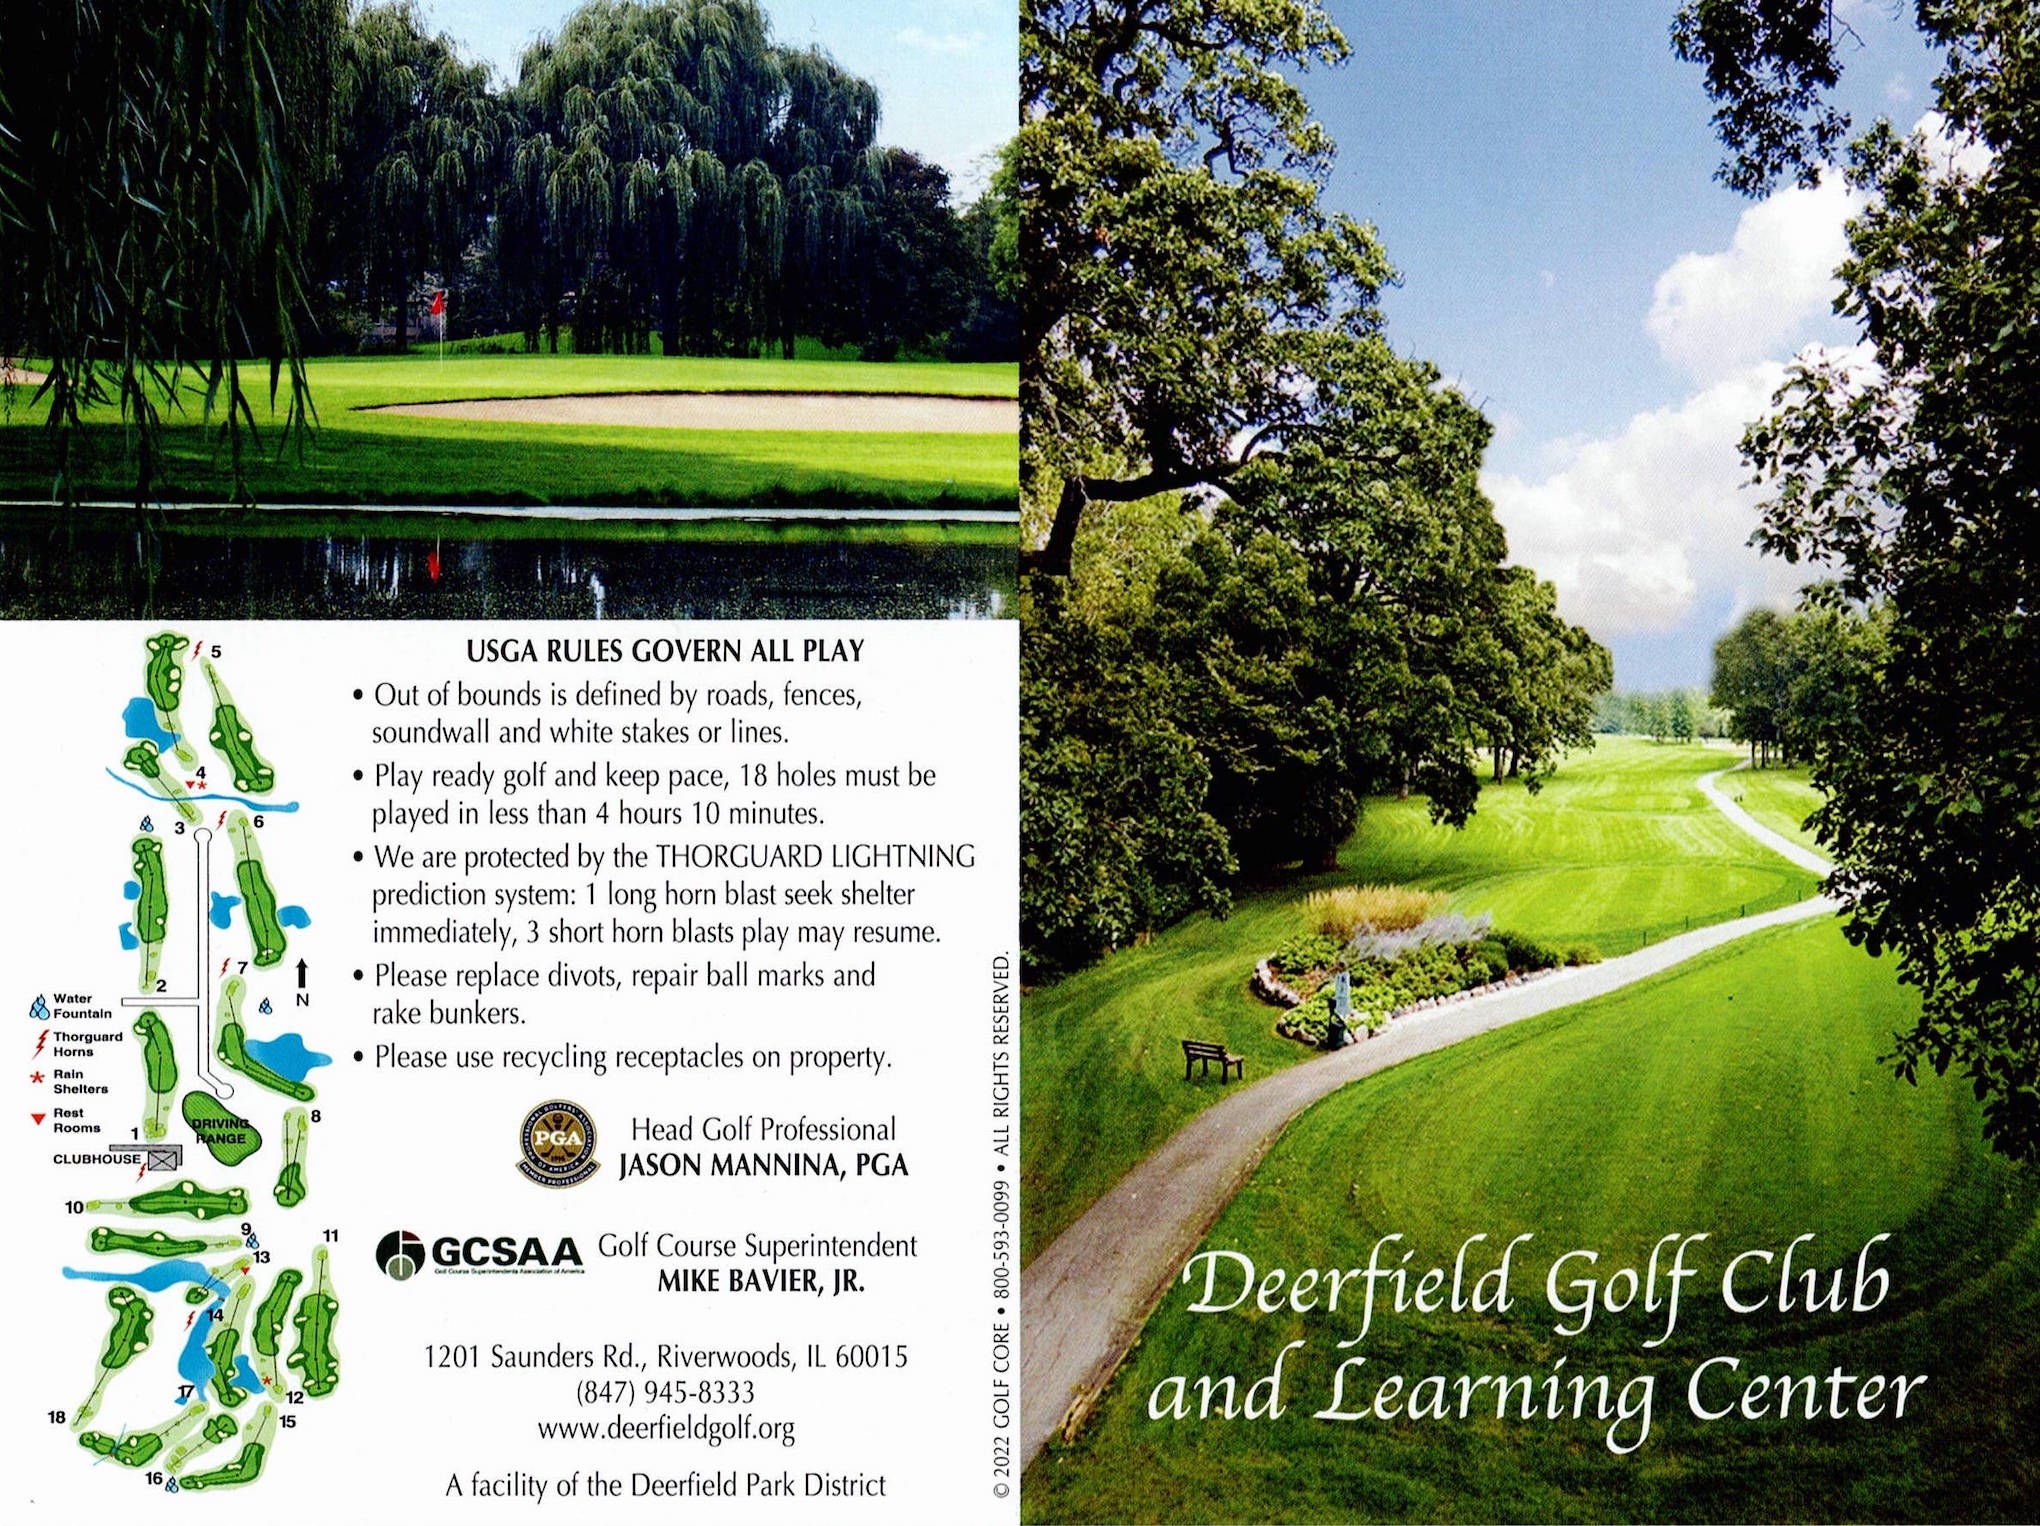 Scan of the scorecard from Deerfield Golf Club & Learning Center in Riverwoods, Illinois. 